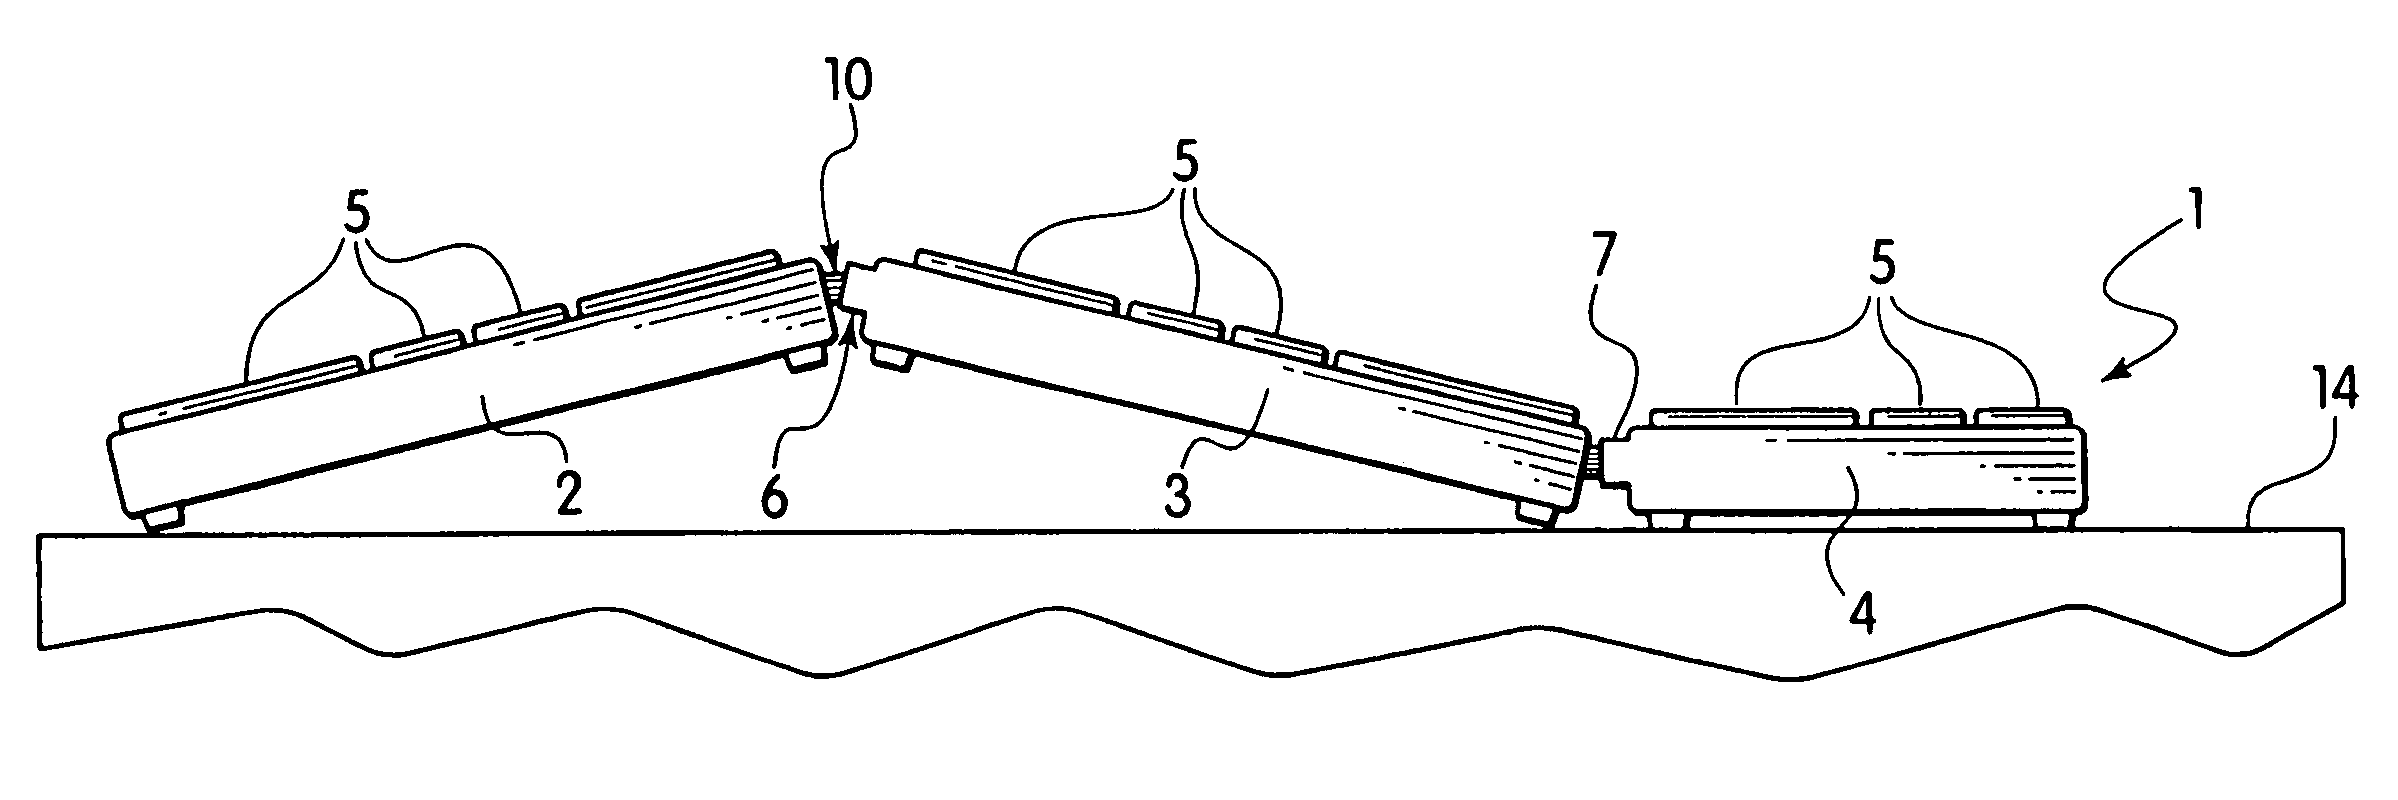 Adjustable keyboard with adjusting and locking mechanism, and method of its use